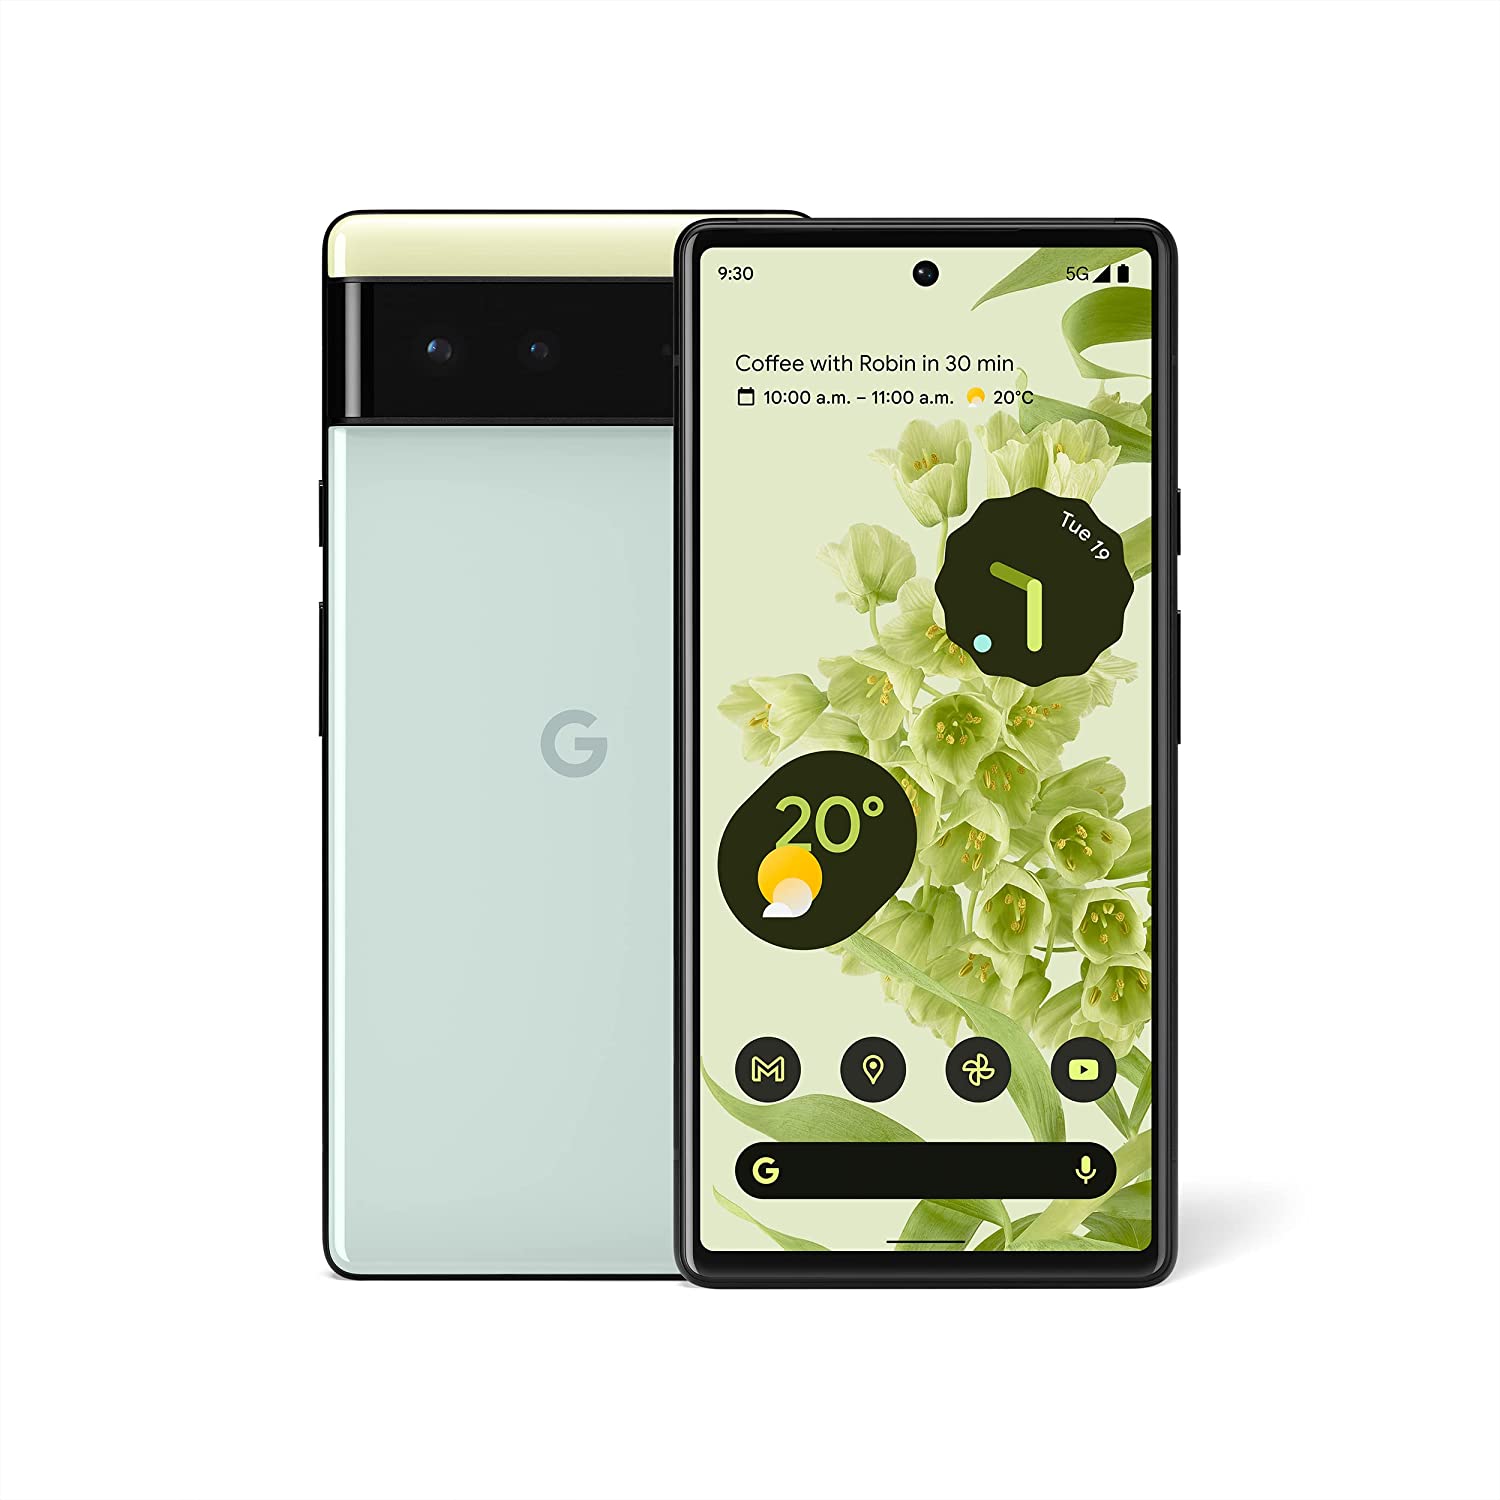 Google Pixel 6 5G GB7N6 Sorta Seafoam 256GB 8GB RAM Gsm Unlocked Phone  Google Tensor 50MP The phone comes with a 6.40-inch touchscreen display  with a resolution of 1080x2400 pixels at a